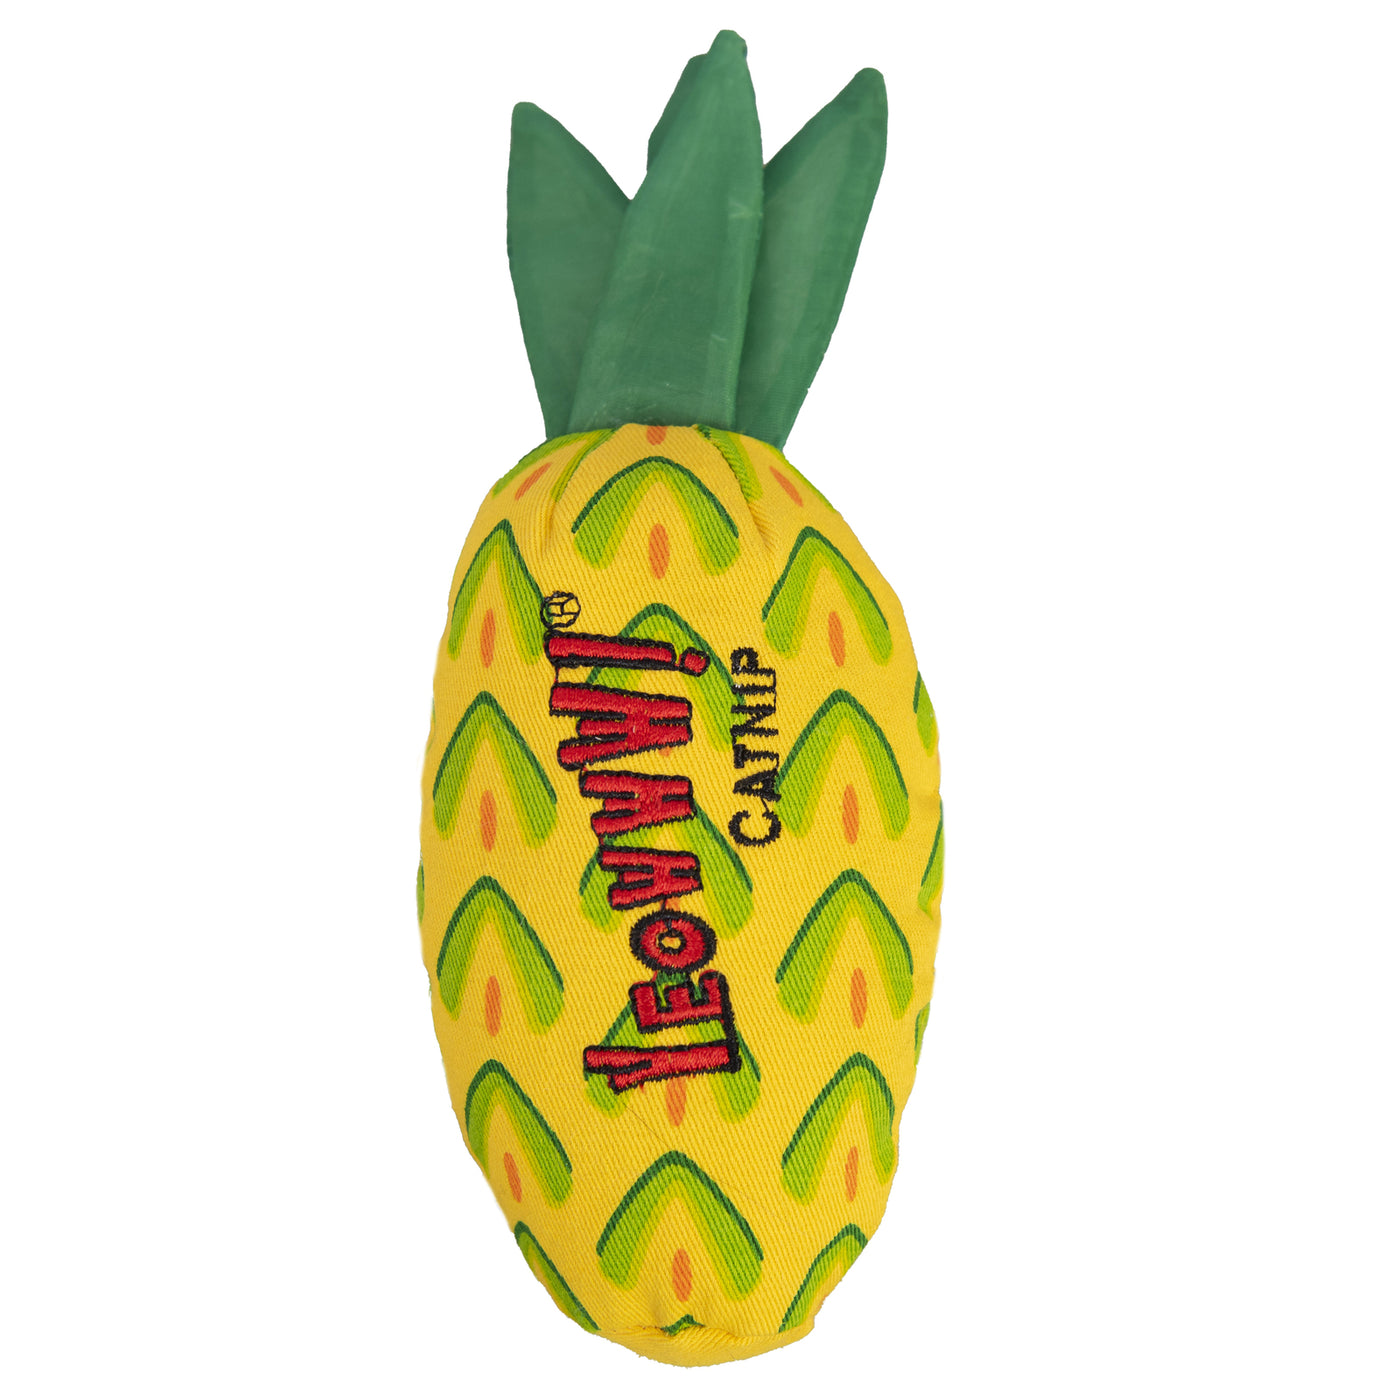 Yeowww! Pineapple Cat Toy with Pure American Catnip